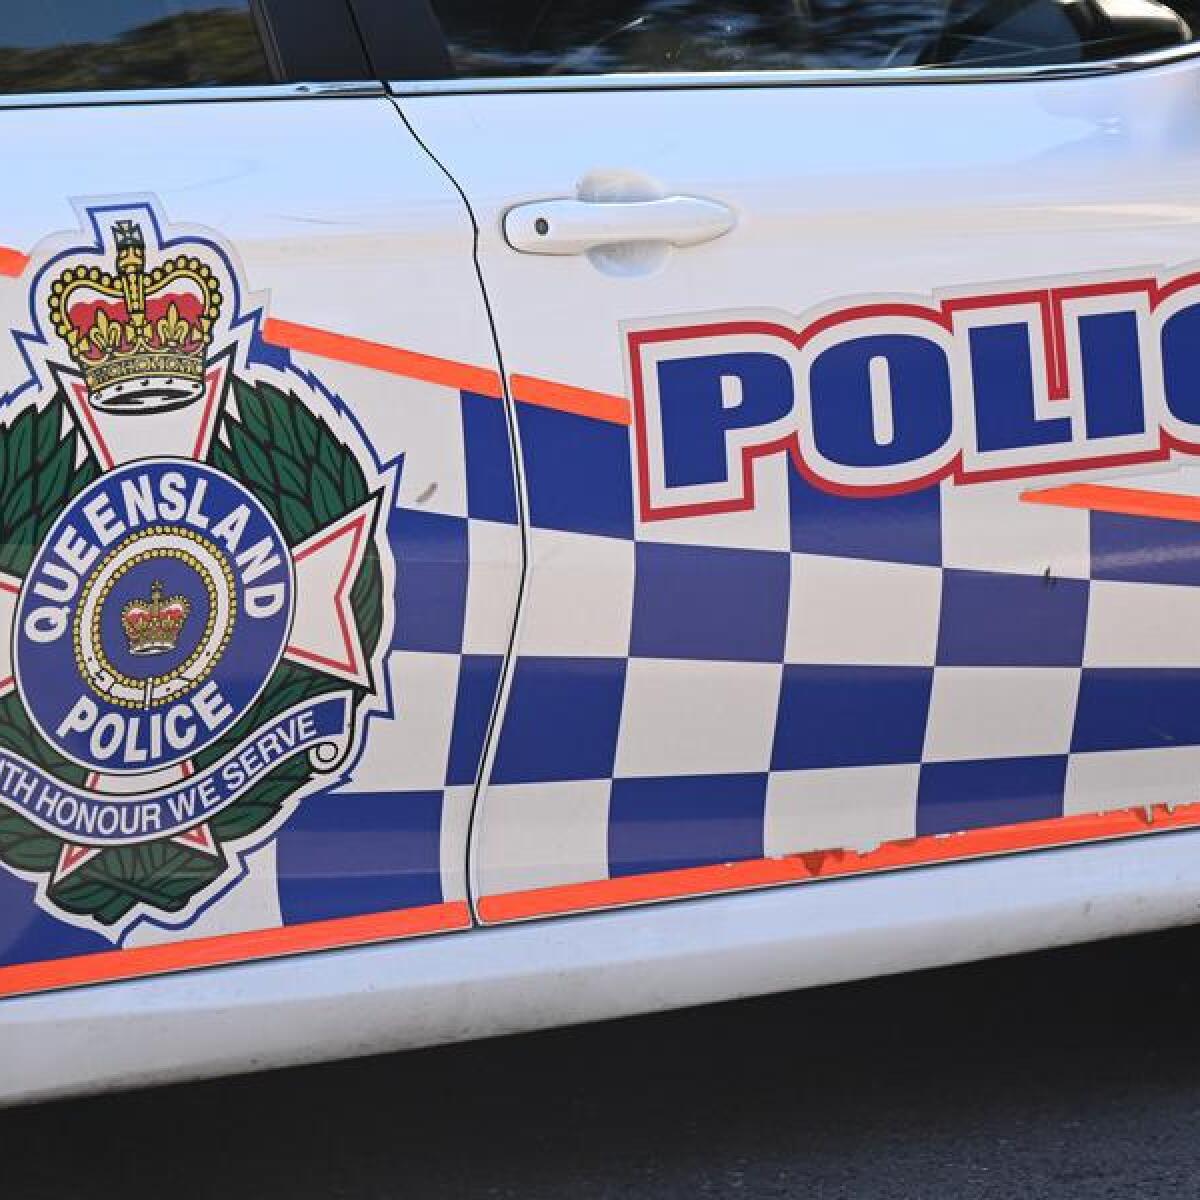 A police car in Queensland.